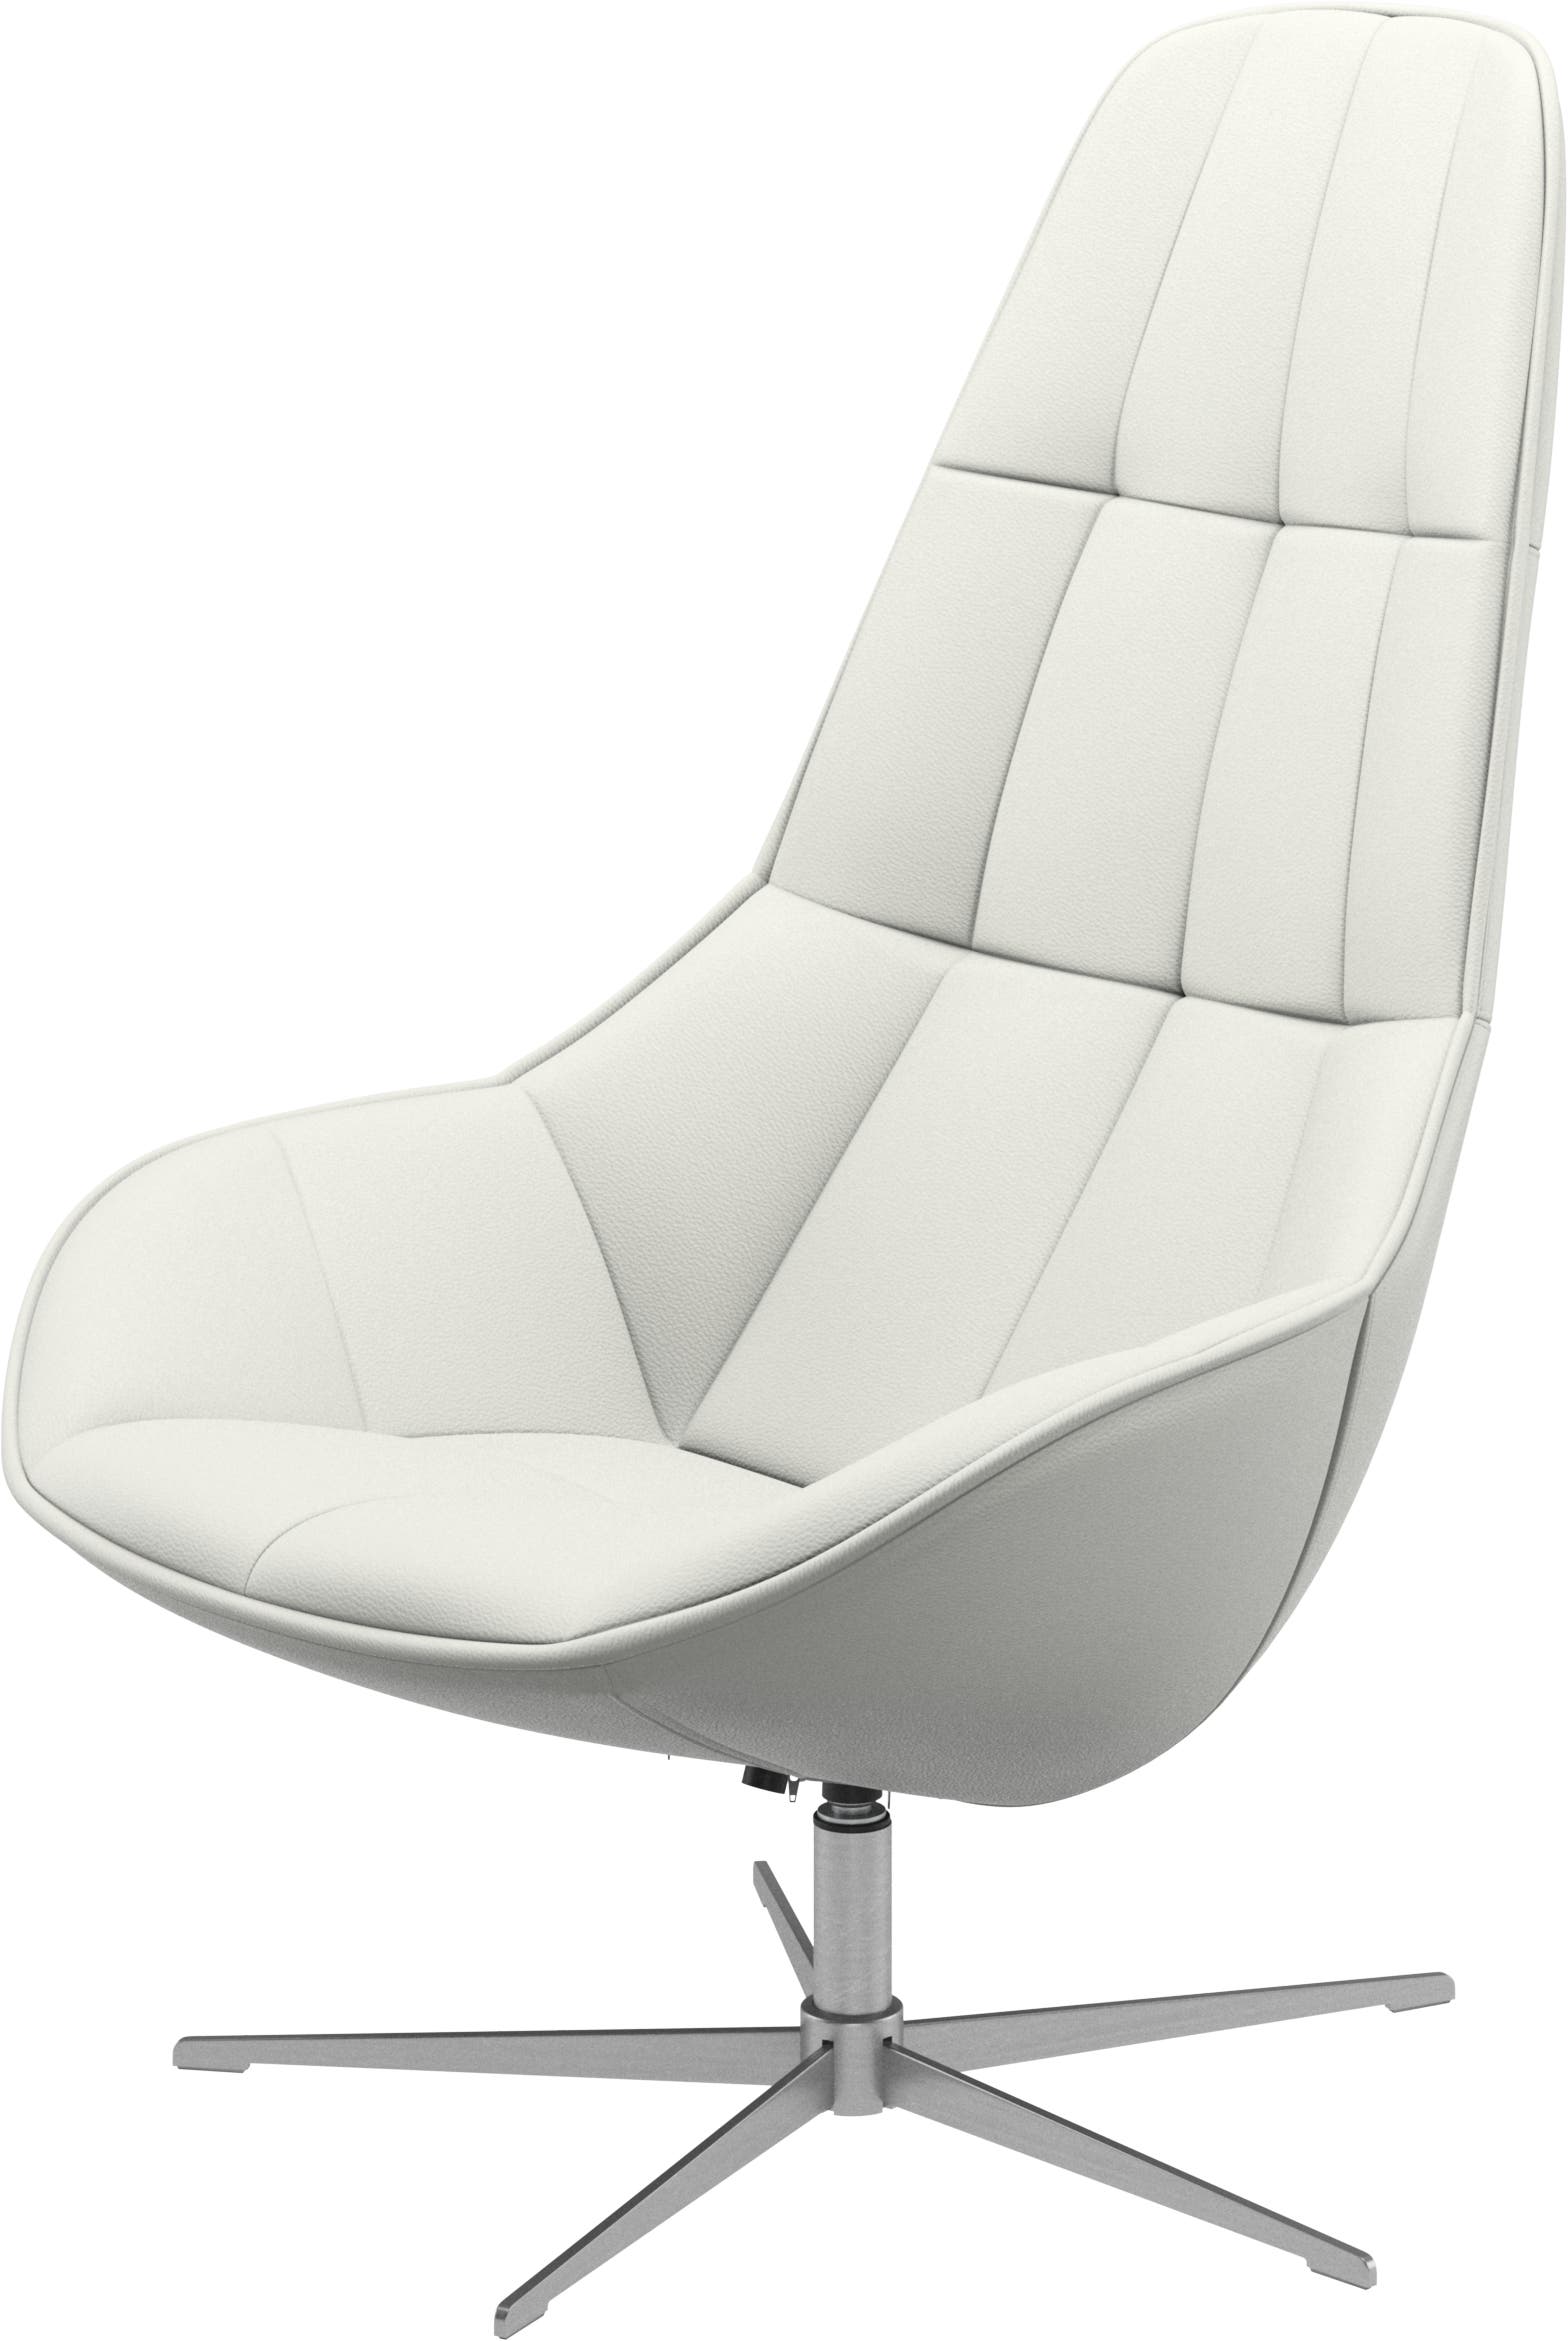 Boston chair with swivel function